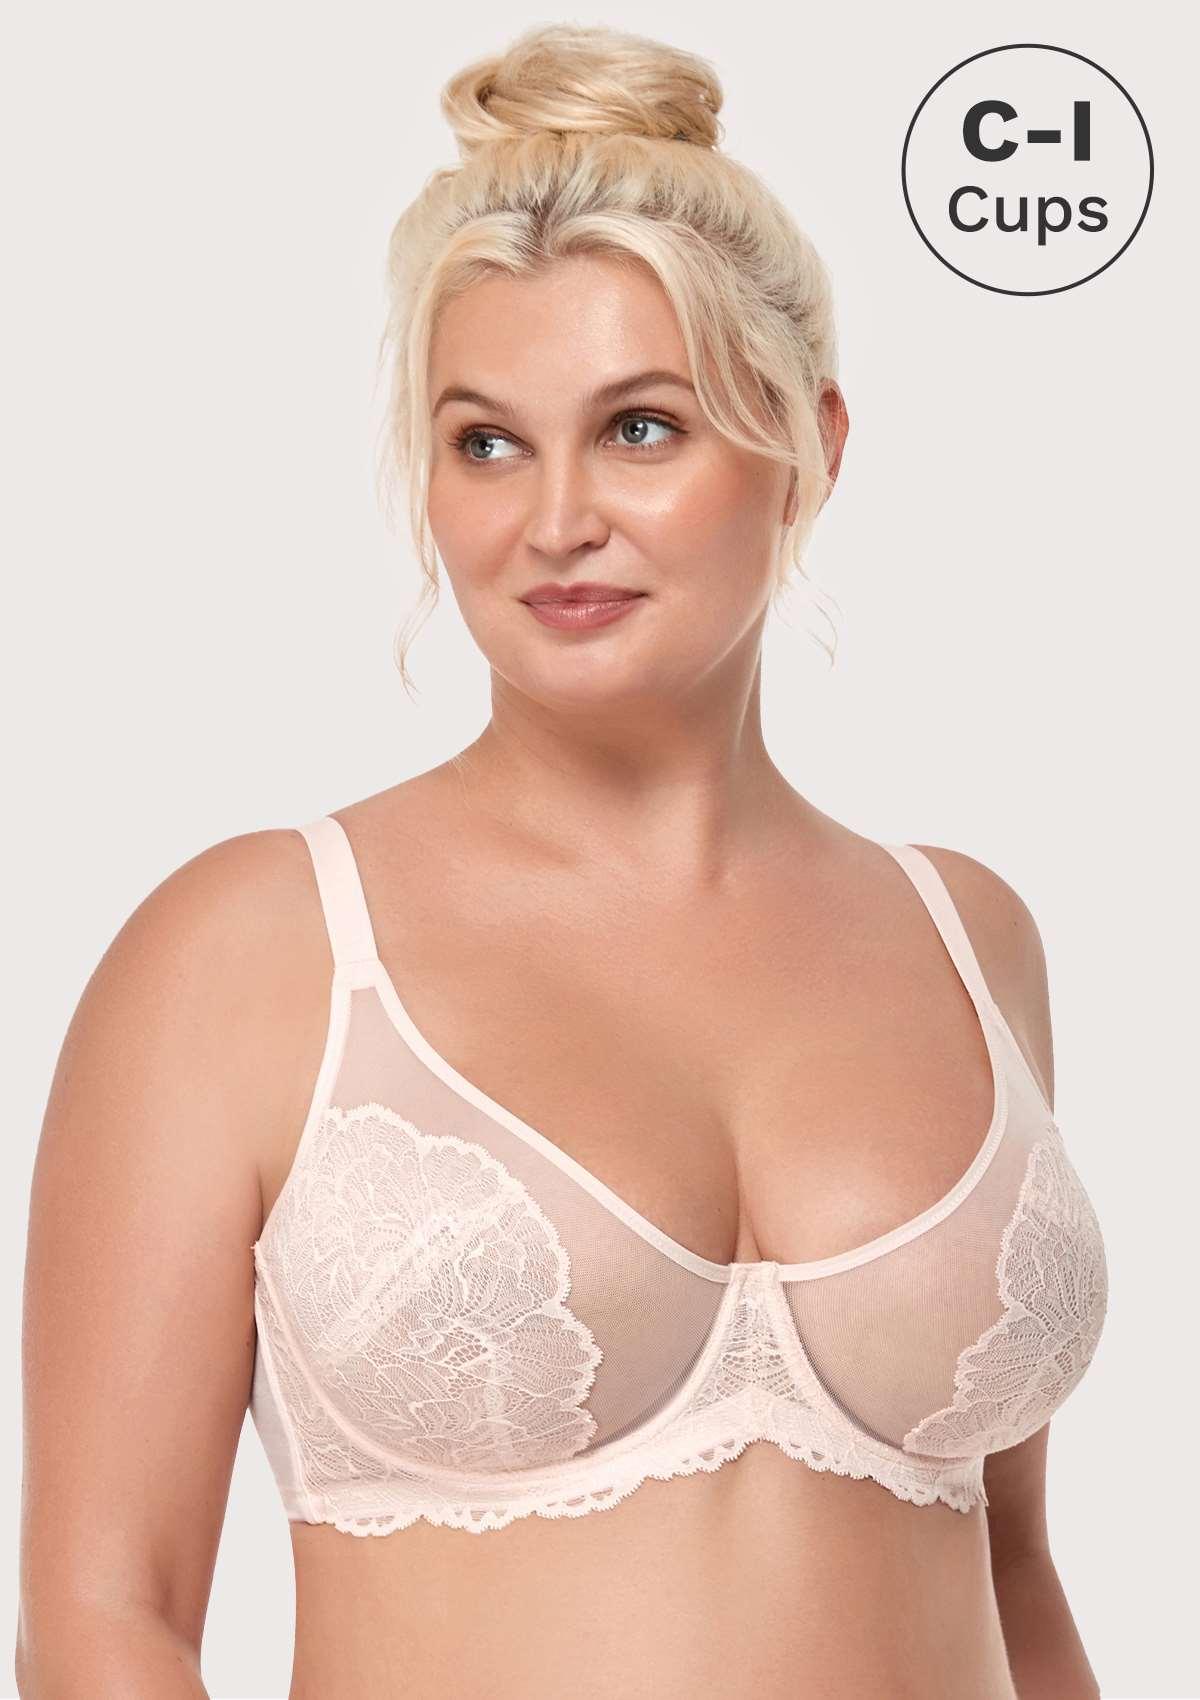 HSIA Blossom Matching Lacey Underwear And Bra Set: Sexy Lace Bra - Dusty Peach / 40 / H